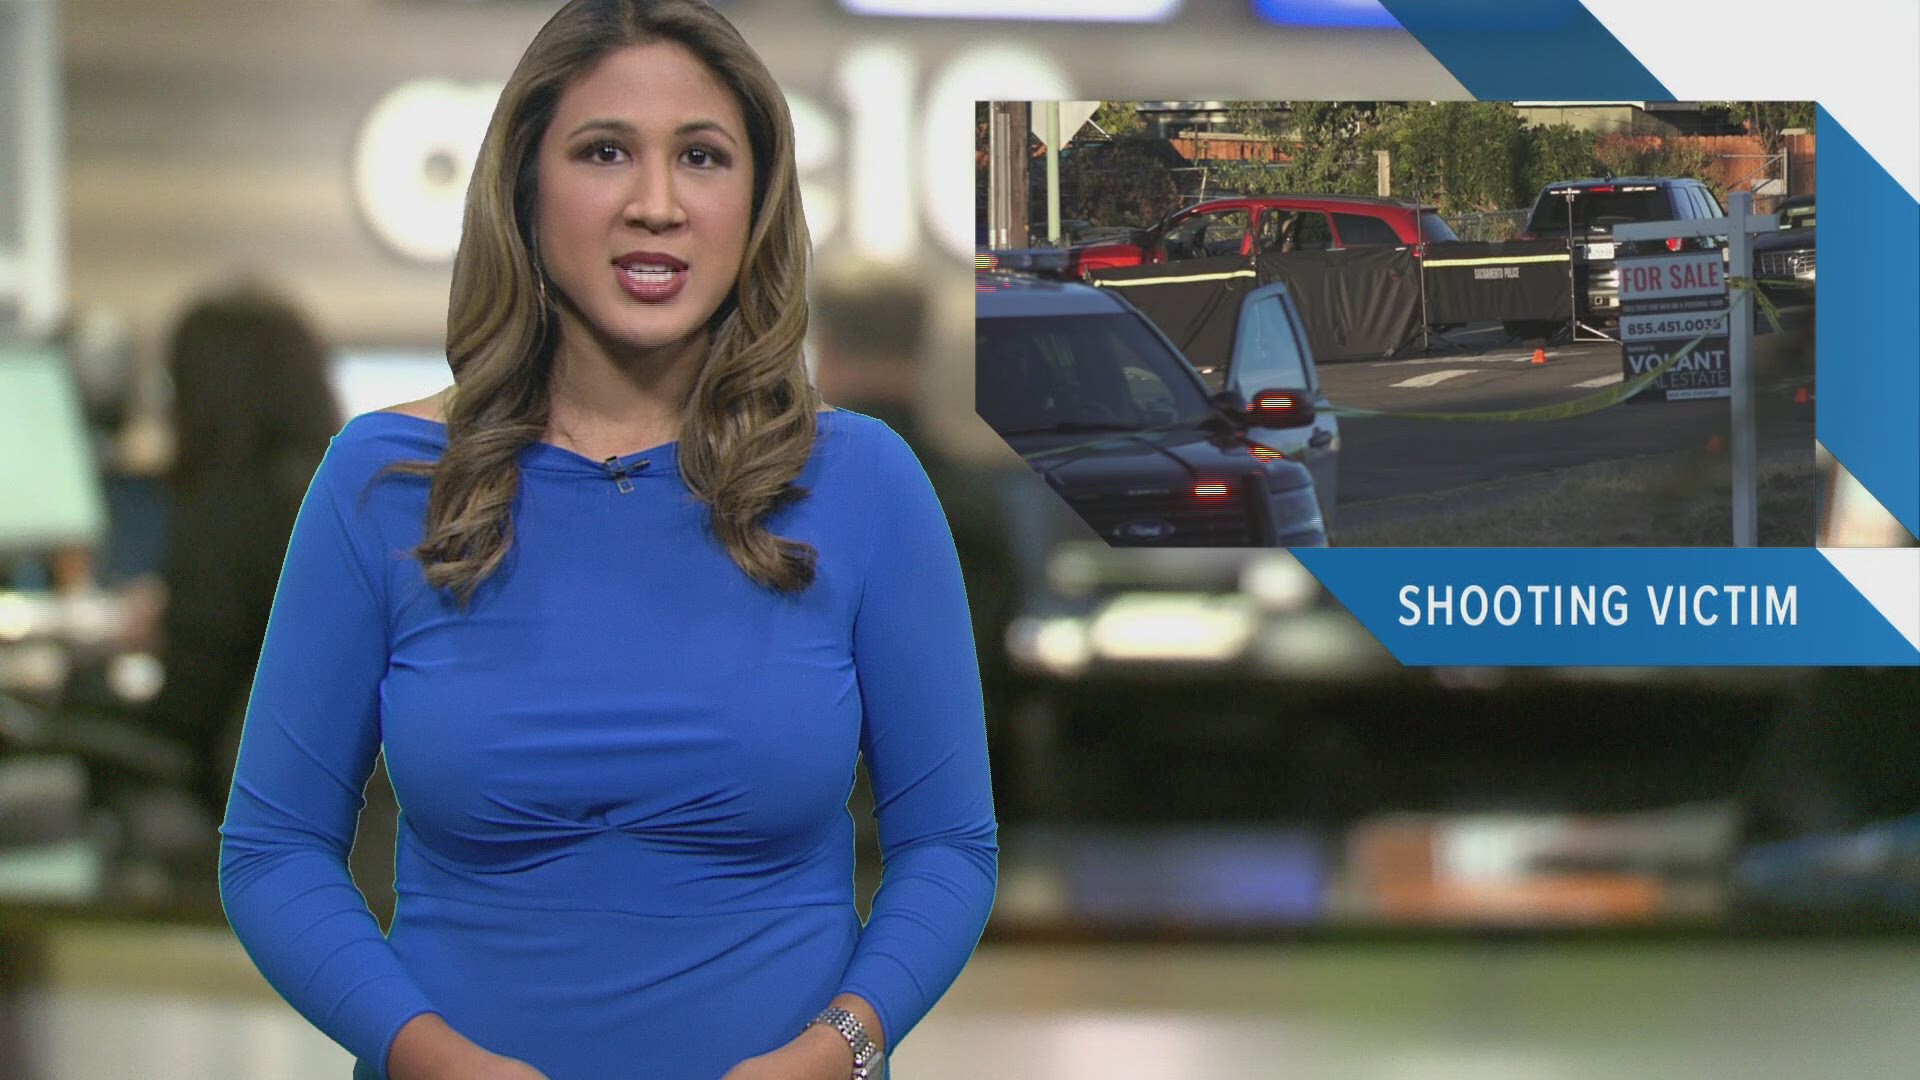 Evening Headlines: September 22, 2019 | Catch in-depth reporting on #LateNewsTonight at 11 p.m. | The latest Sacramento news is always at www.abc10.com